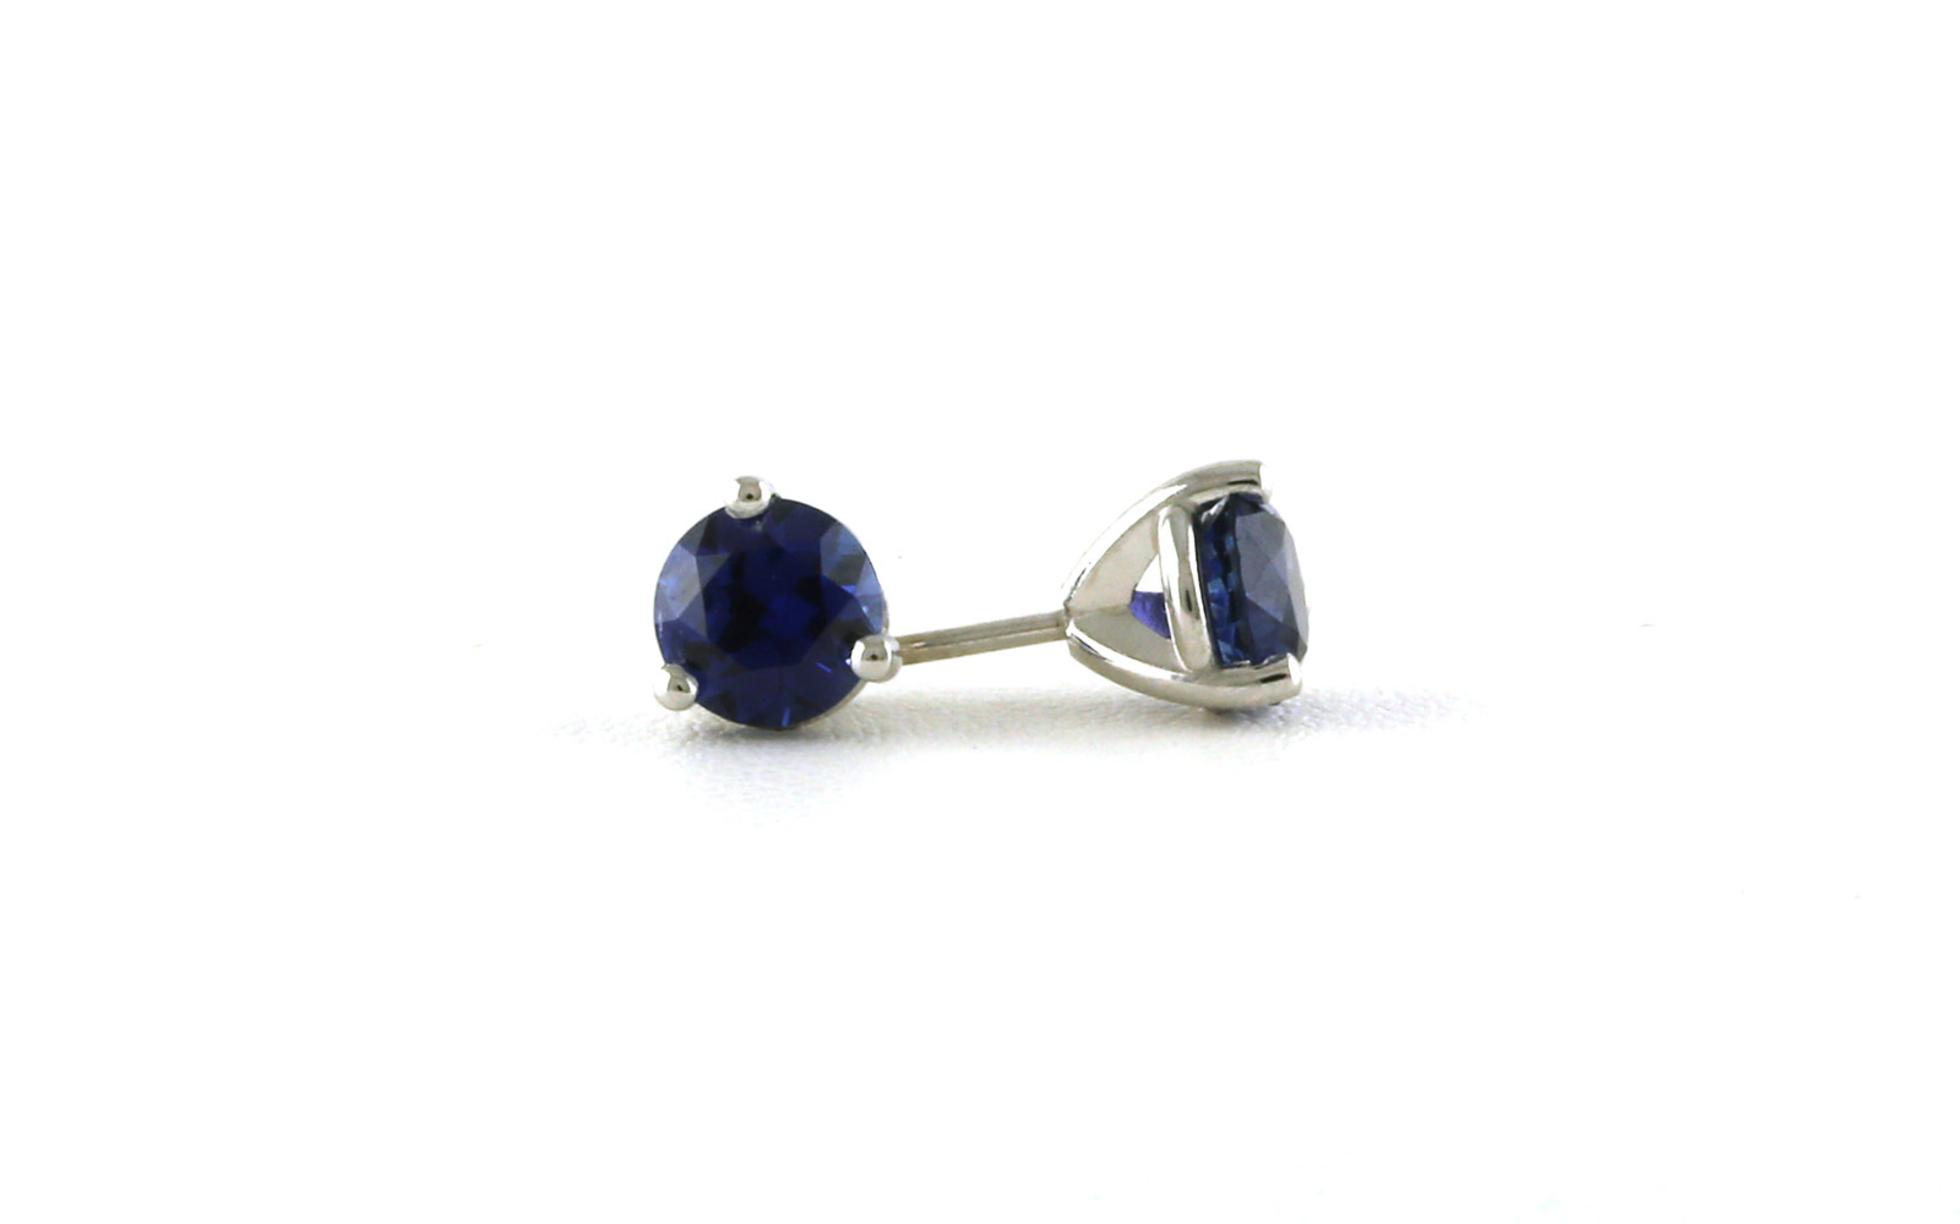 Montana Yogo Sapphire Stud Earrings in 3-Prong Martini Settings in White Gold (1.51cts TWT)